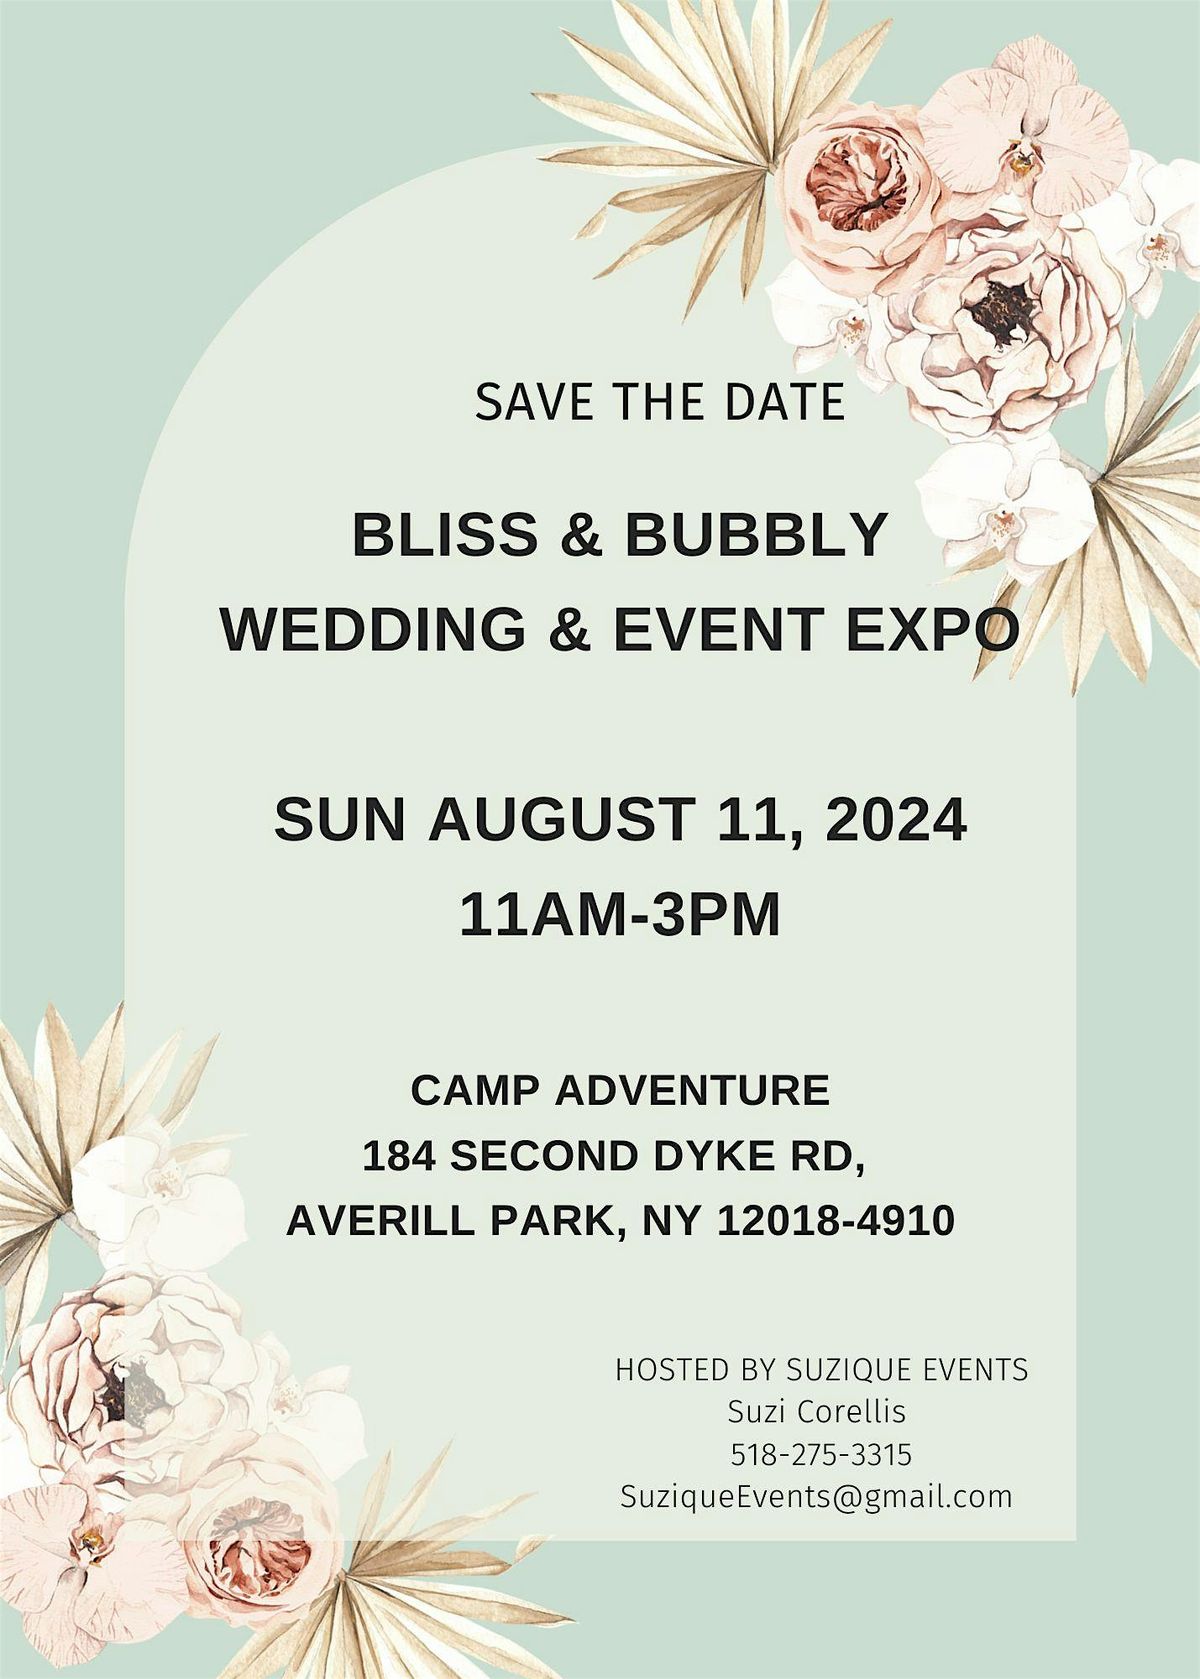 Bliss & Bubbly Wedding & Event Expo